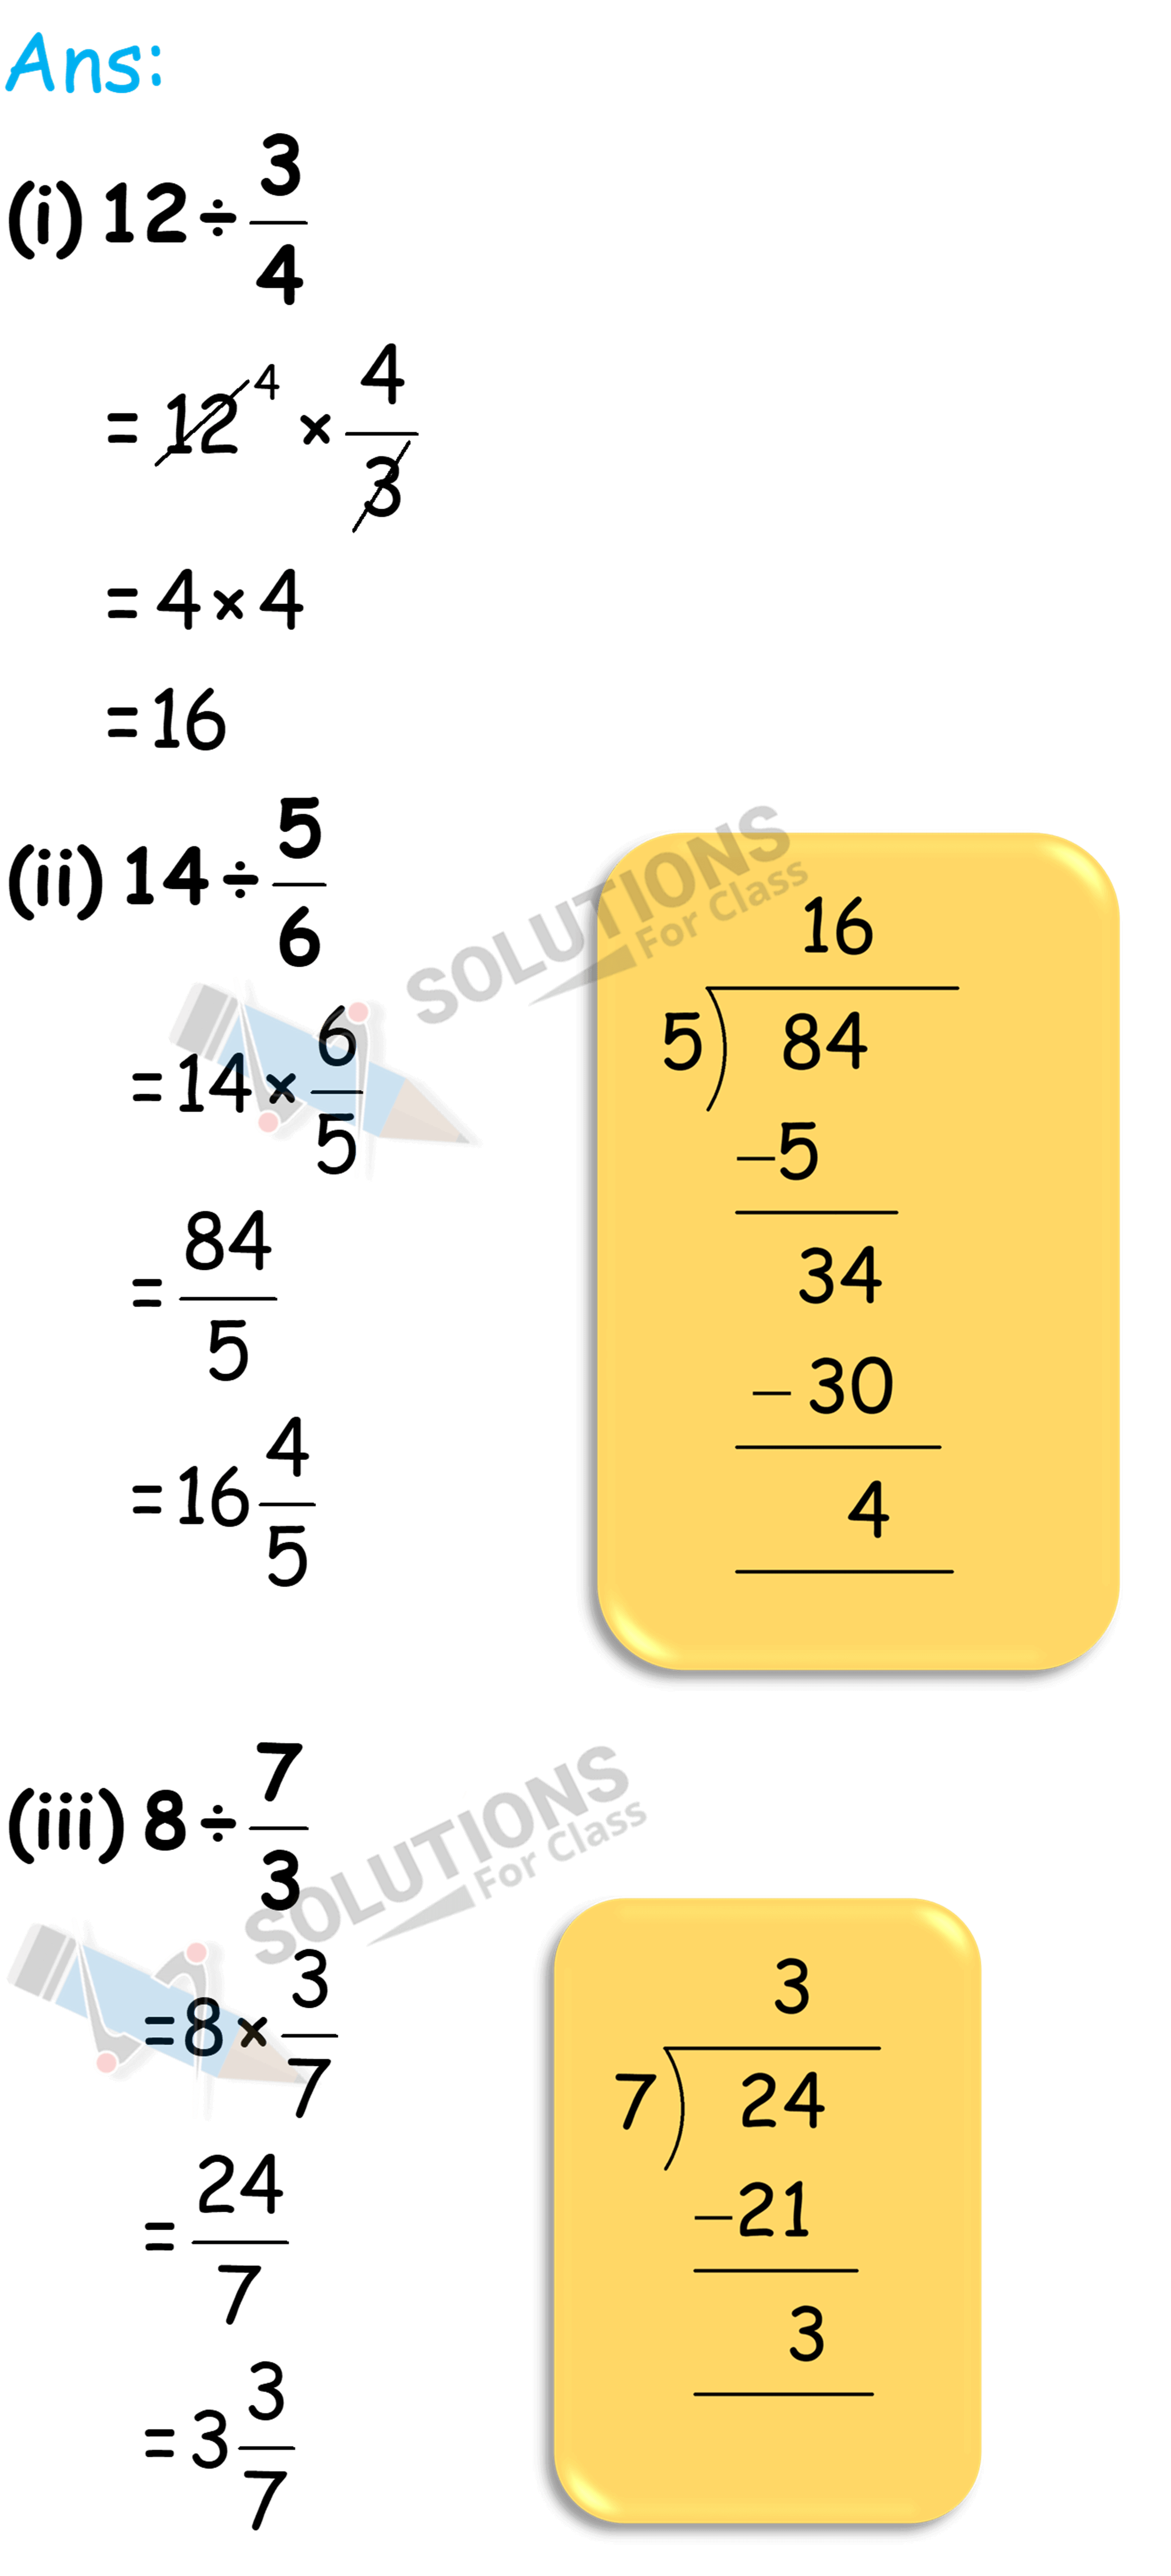 NCERT Solutions For Class 7 Chapter 2, Fractions and Decimals , Exercise 2.4 Q.1 (i-iii)